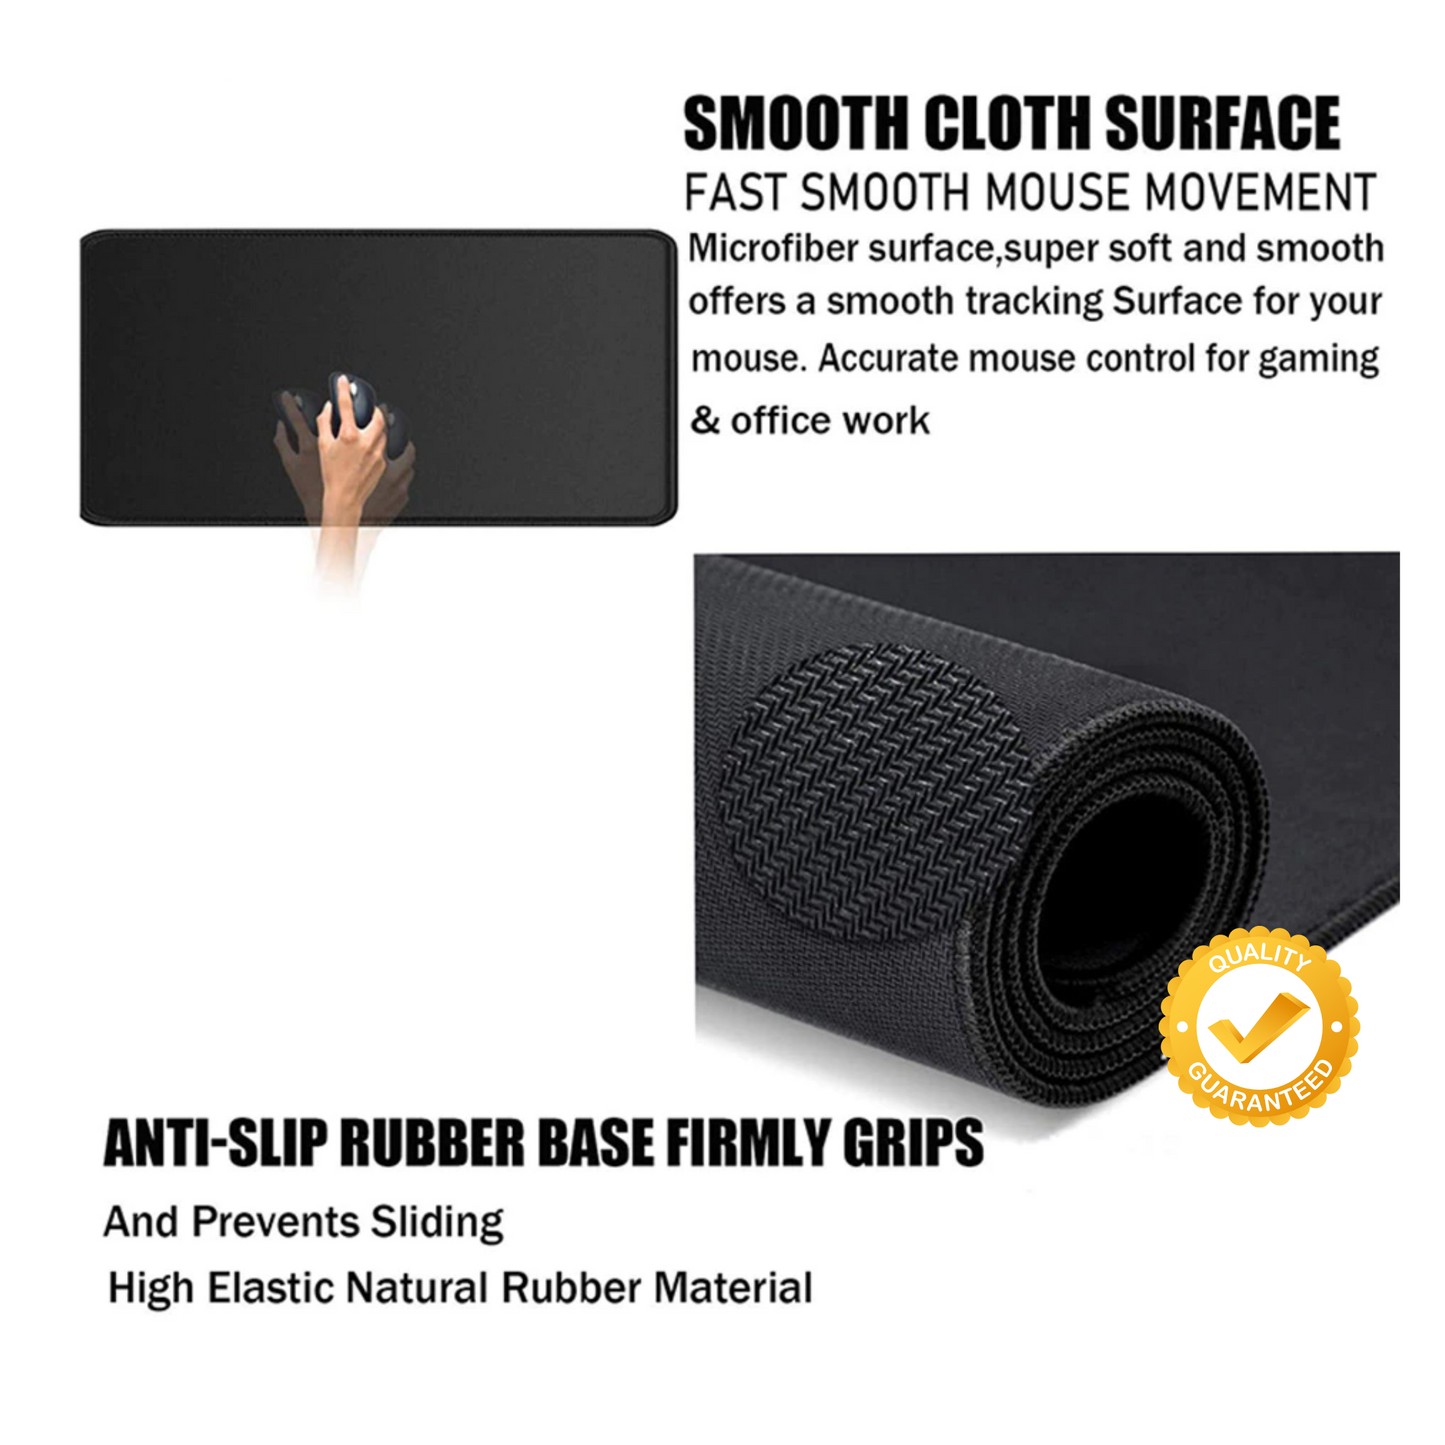 Custom Large Mousepads Deskmats | DIY mouse pads with Black edges, Colored edges, unlock edges | customize your office mousepad for gamers